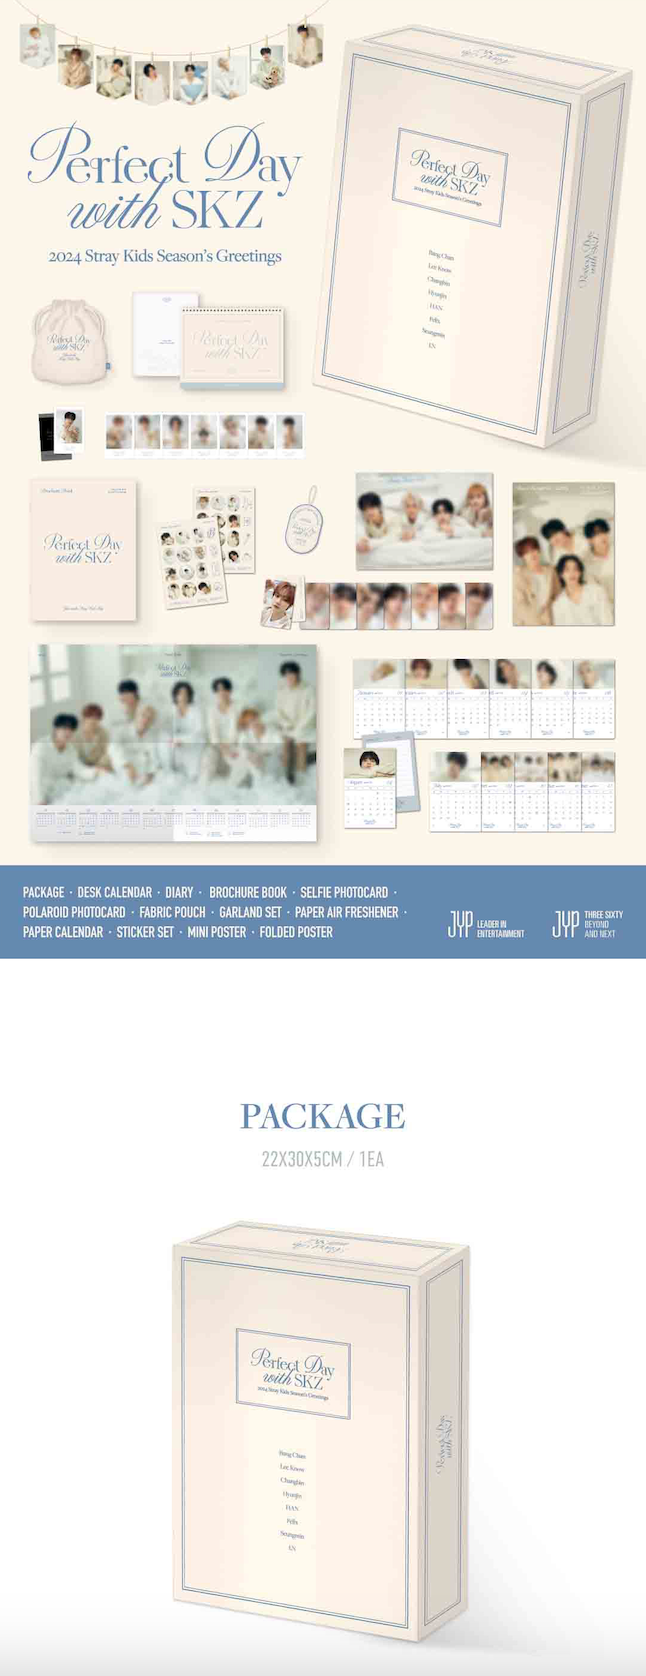 [PRE-ORDER ONLY] [NO GIFT] STRAY KIDS 2024 SEASON'S GREETINGS [PERFECT DAY WITH SKZ]